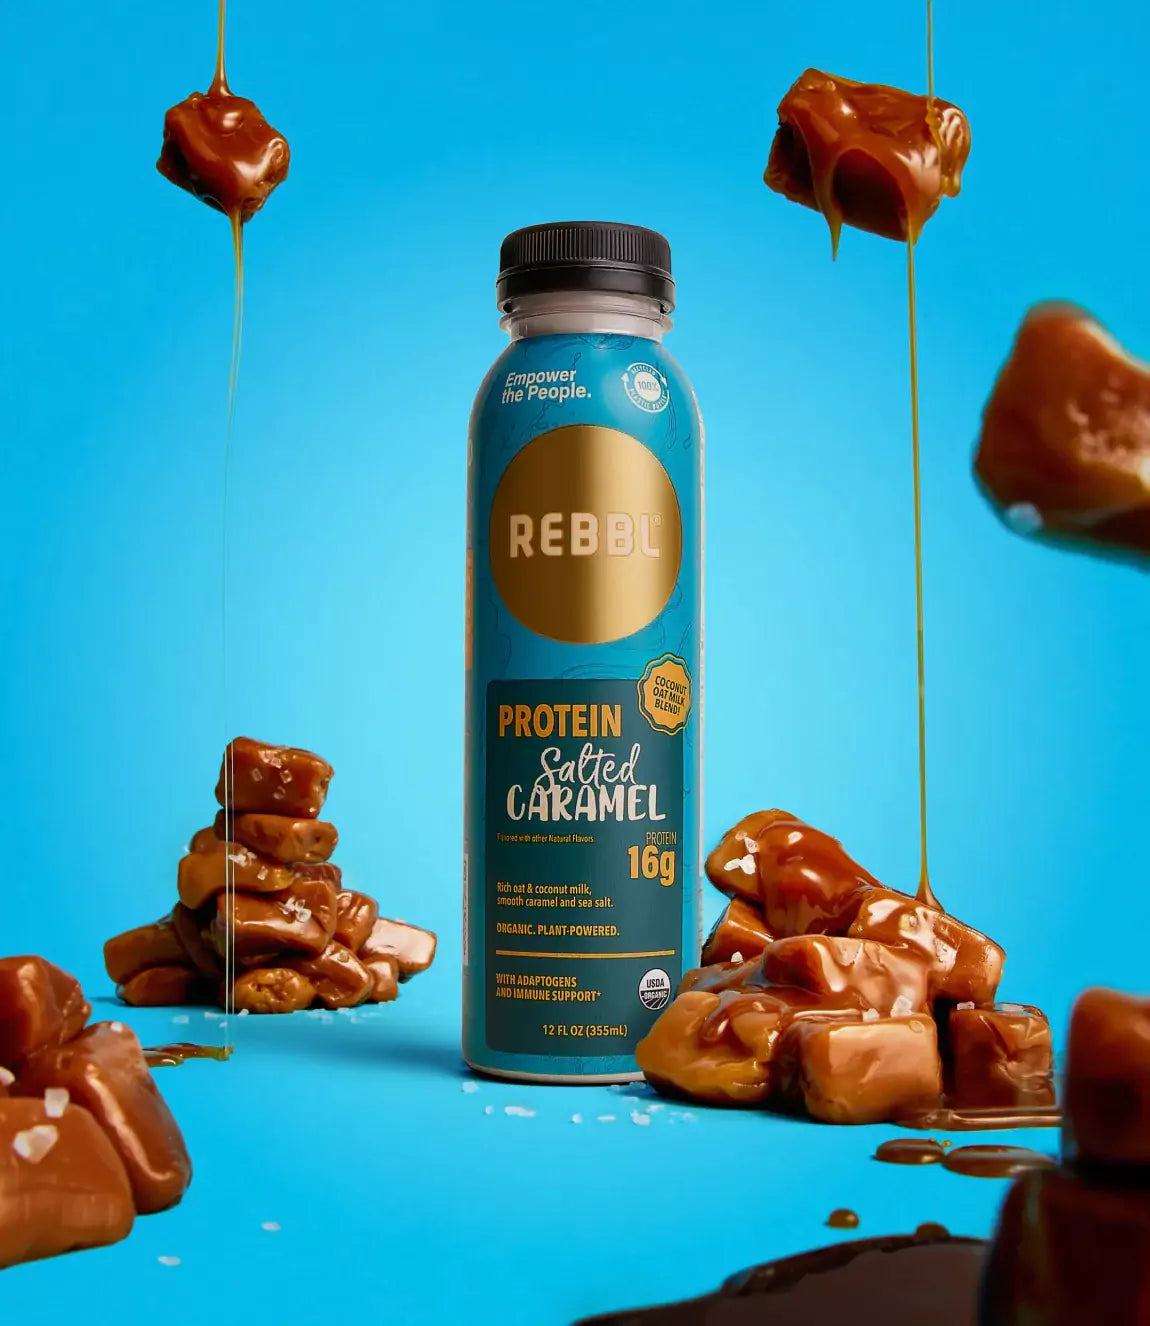 Protein Salted Caramel